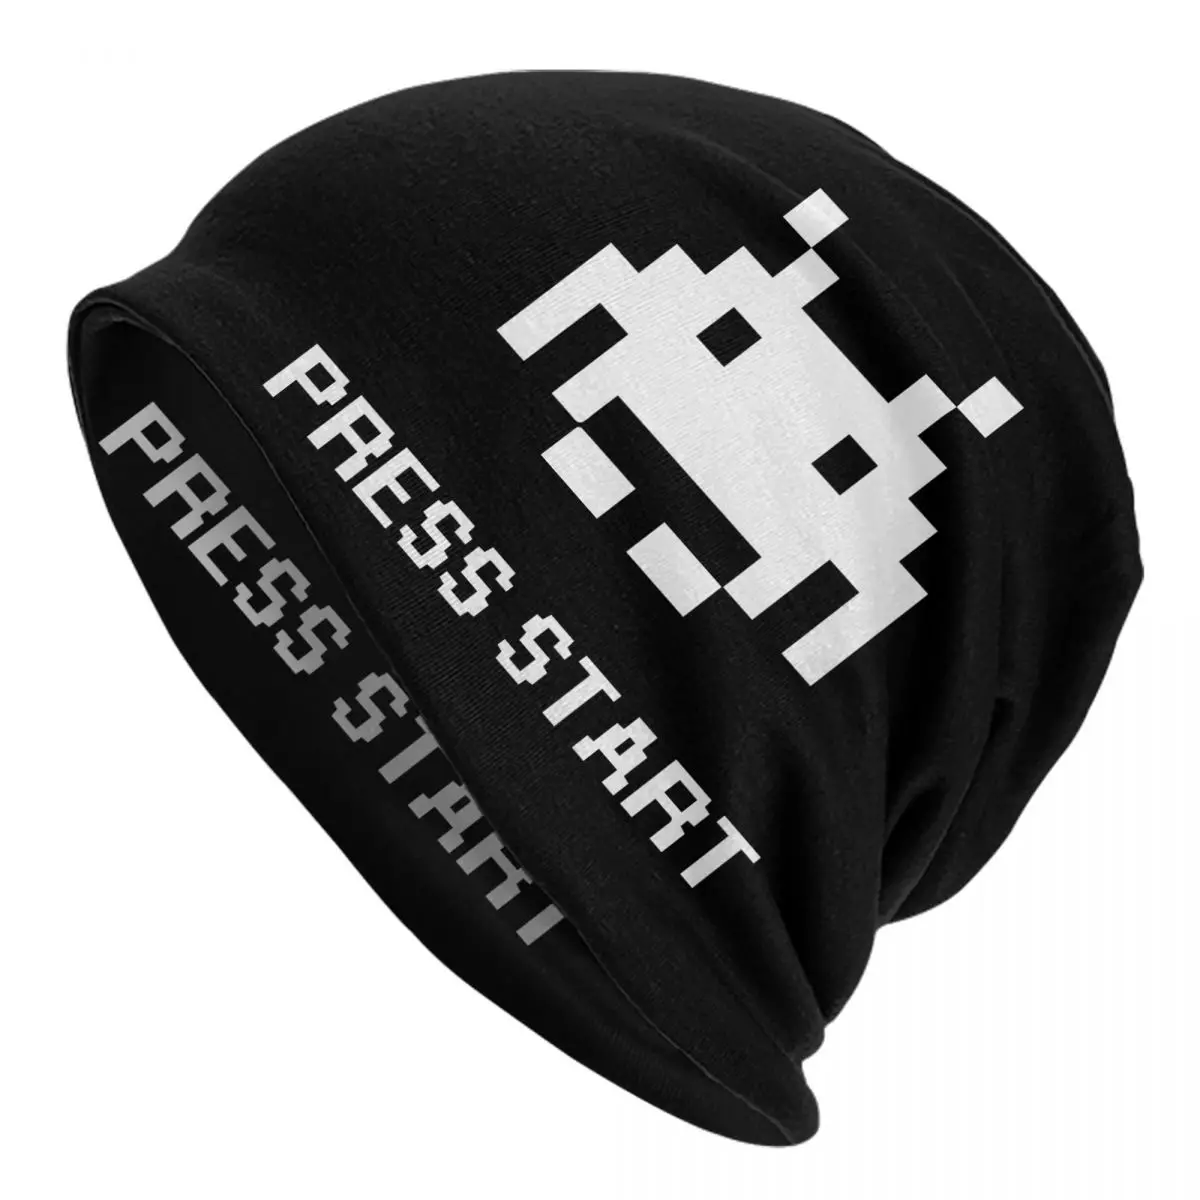 Space Invaders Adult Men's Women's Knit Hat Keep warm winter knitted hat